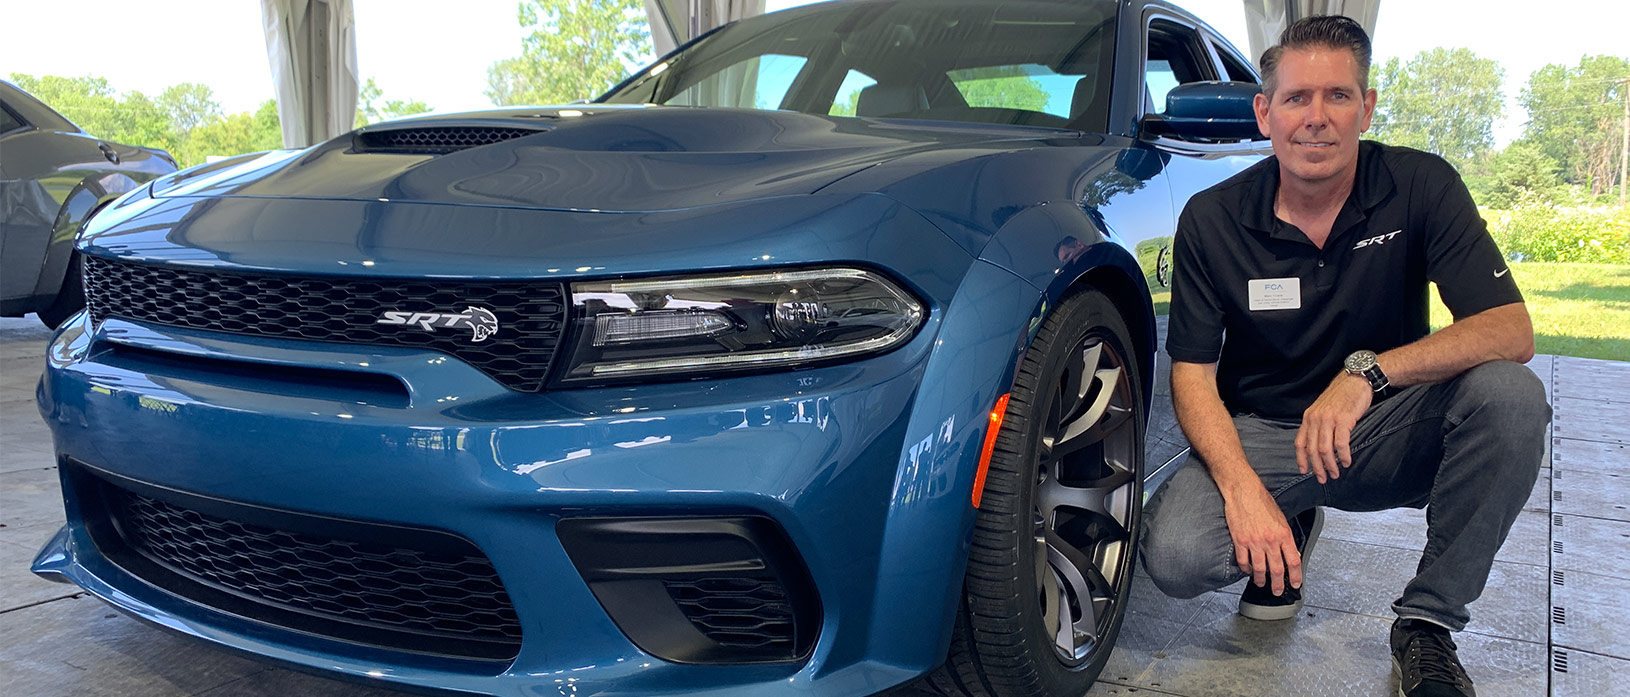 man kneeling next to a 2020 Charger Hellcat Widebody